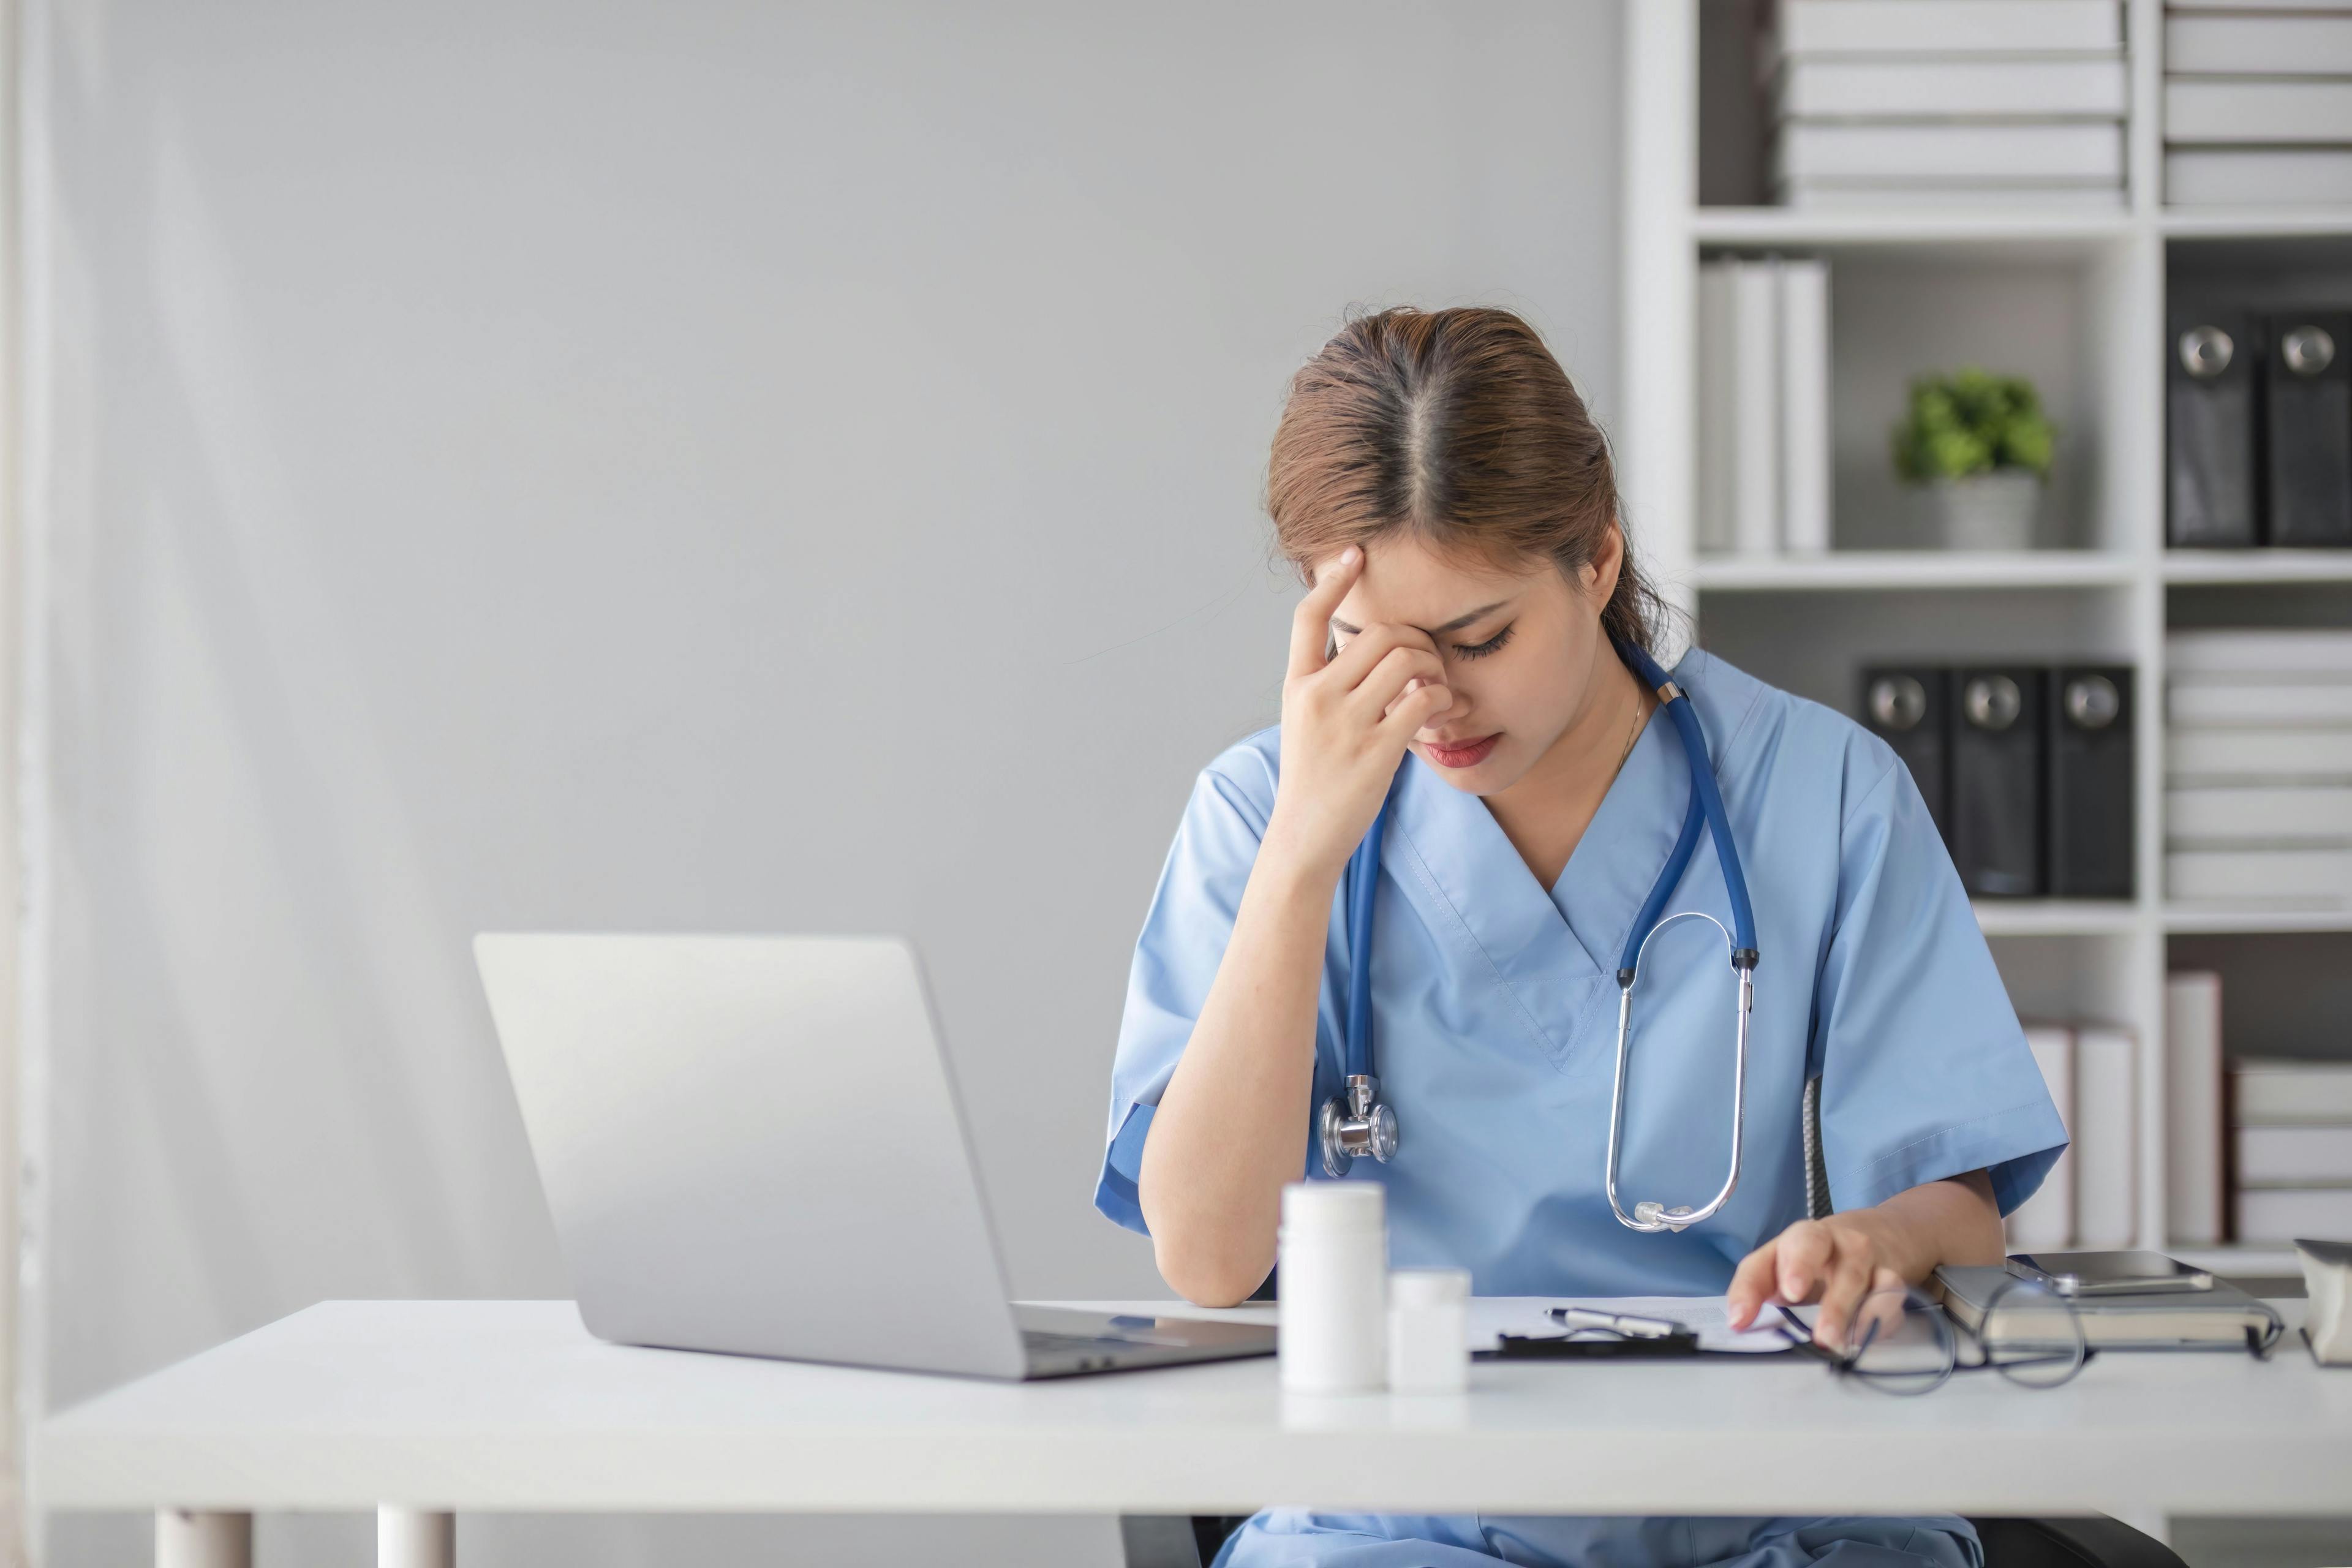 Health care workers are burned out: ©Wichayada -stock.adobe.com